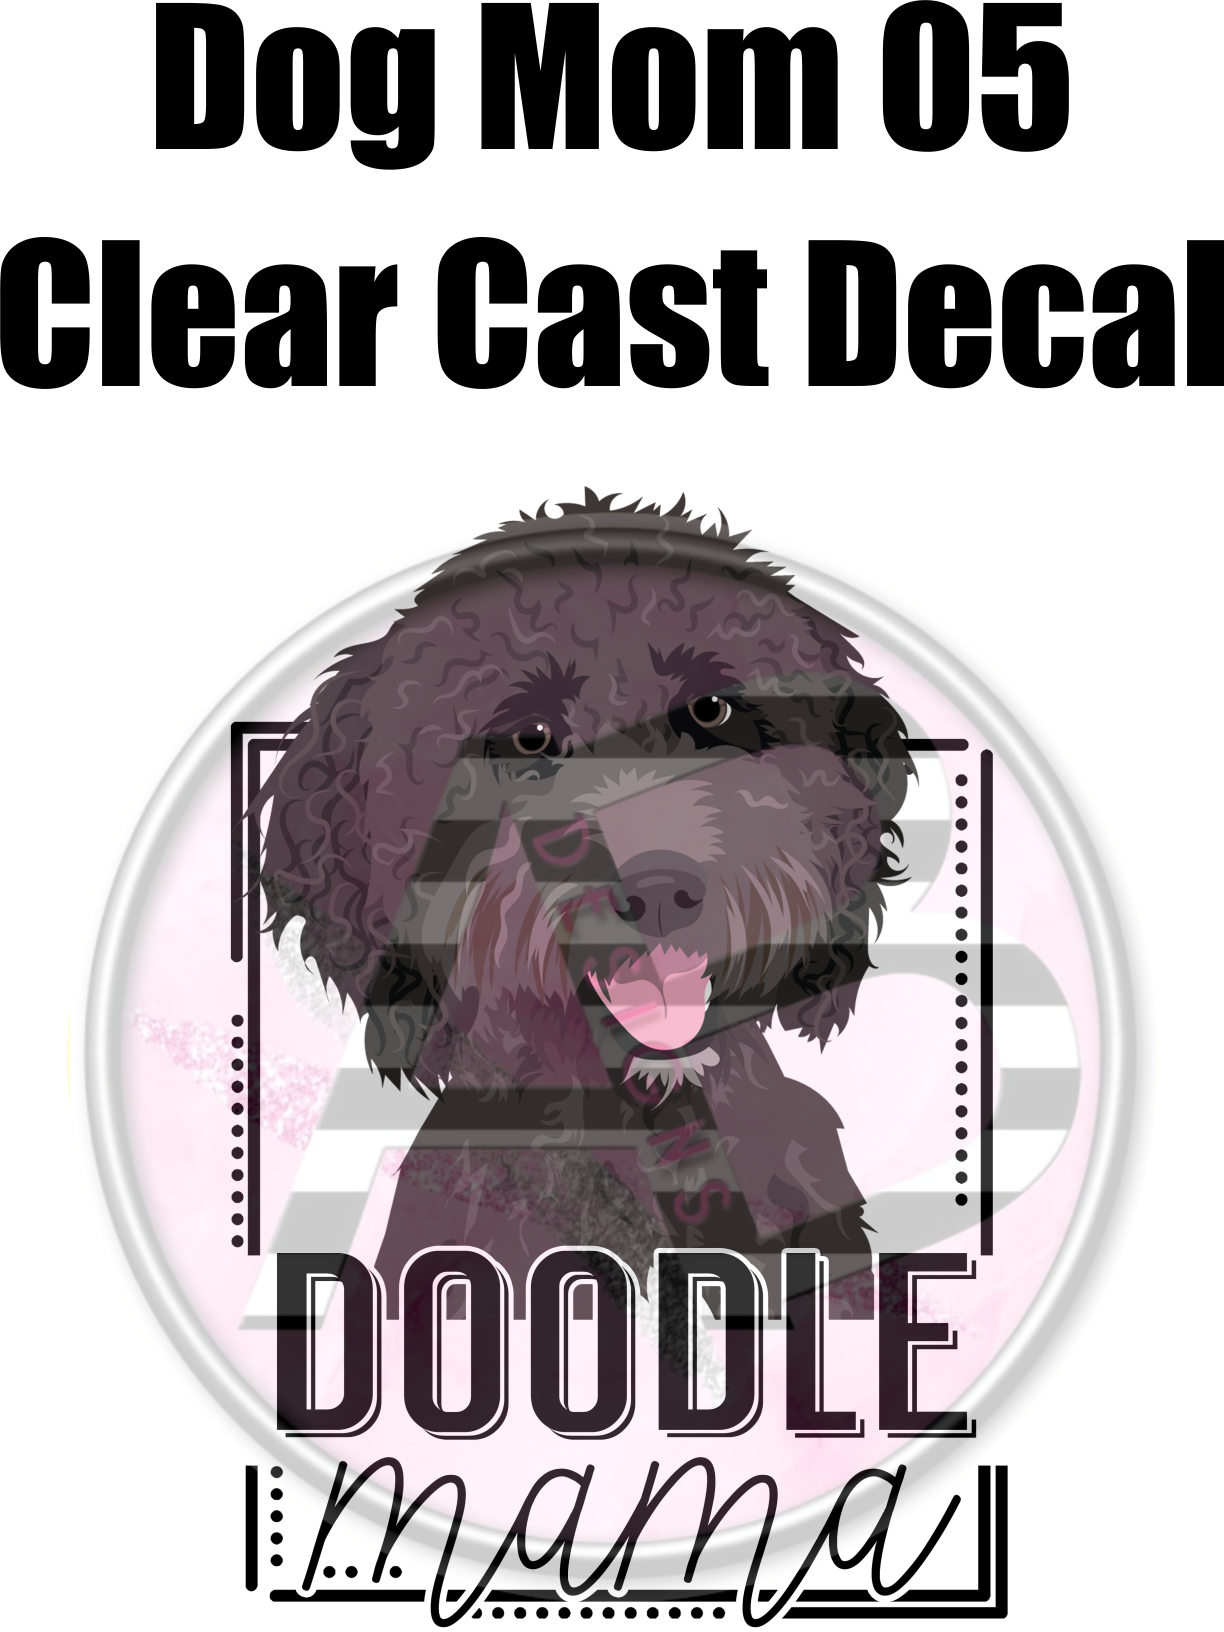 Dog Mom 05 - Clear Cast Decal - 64